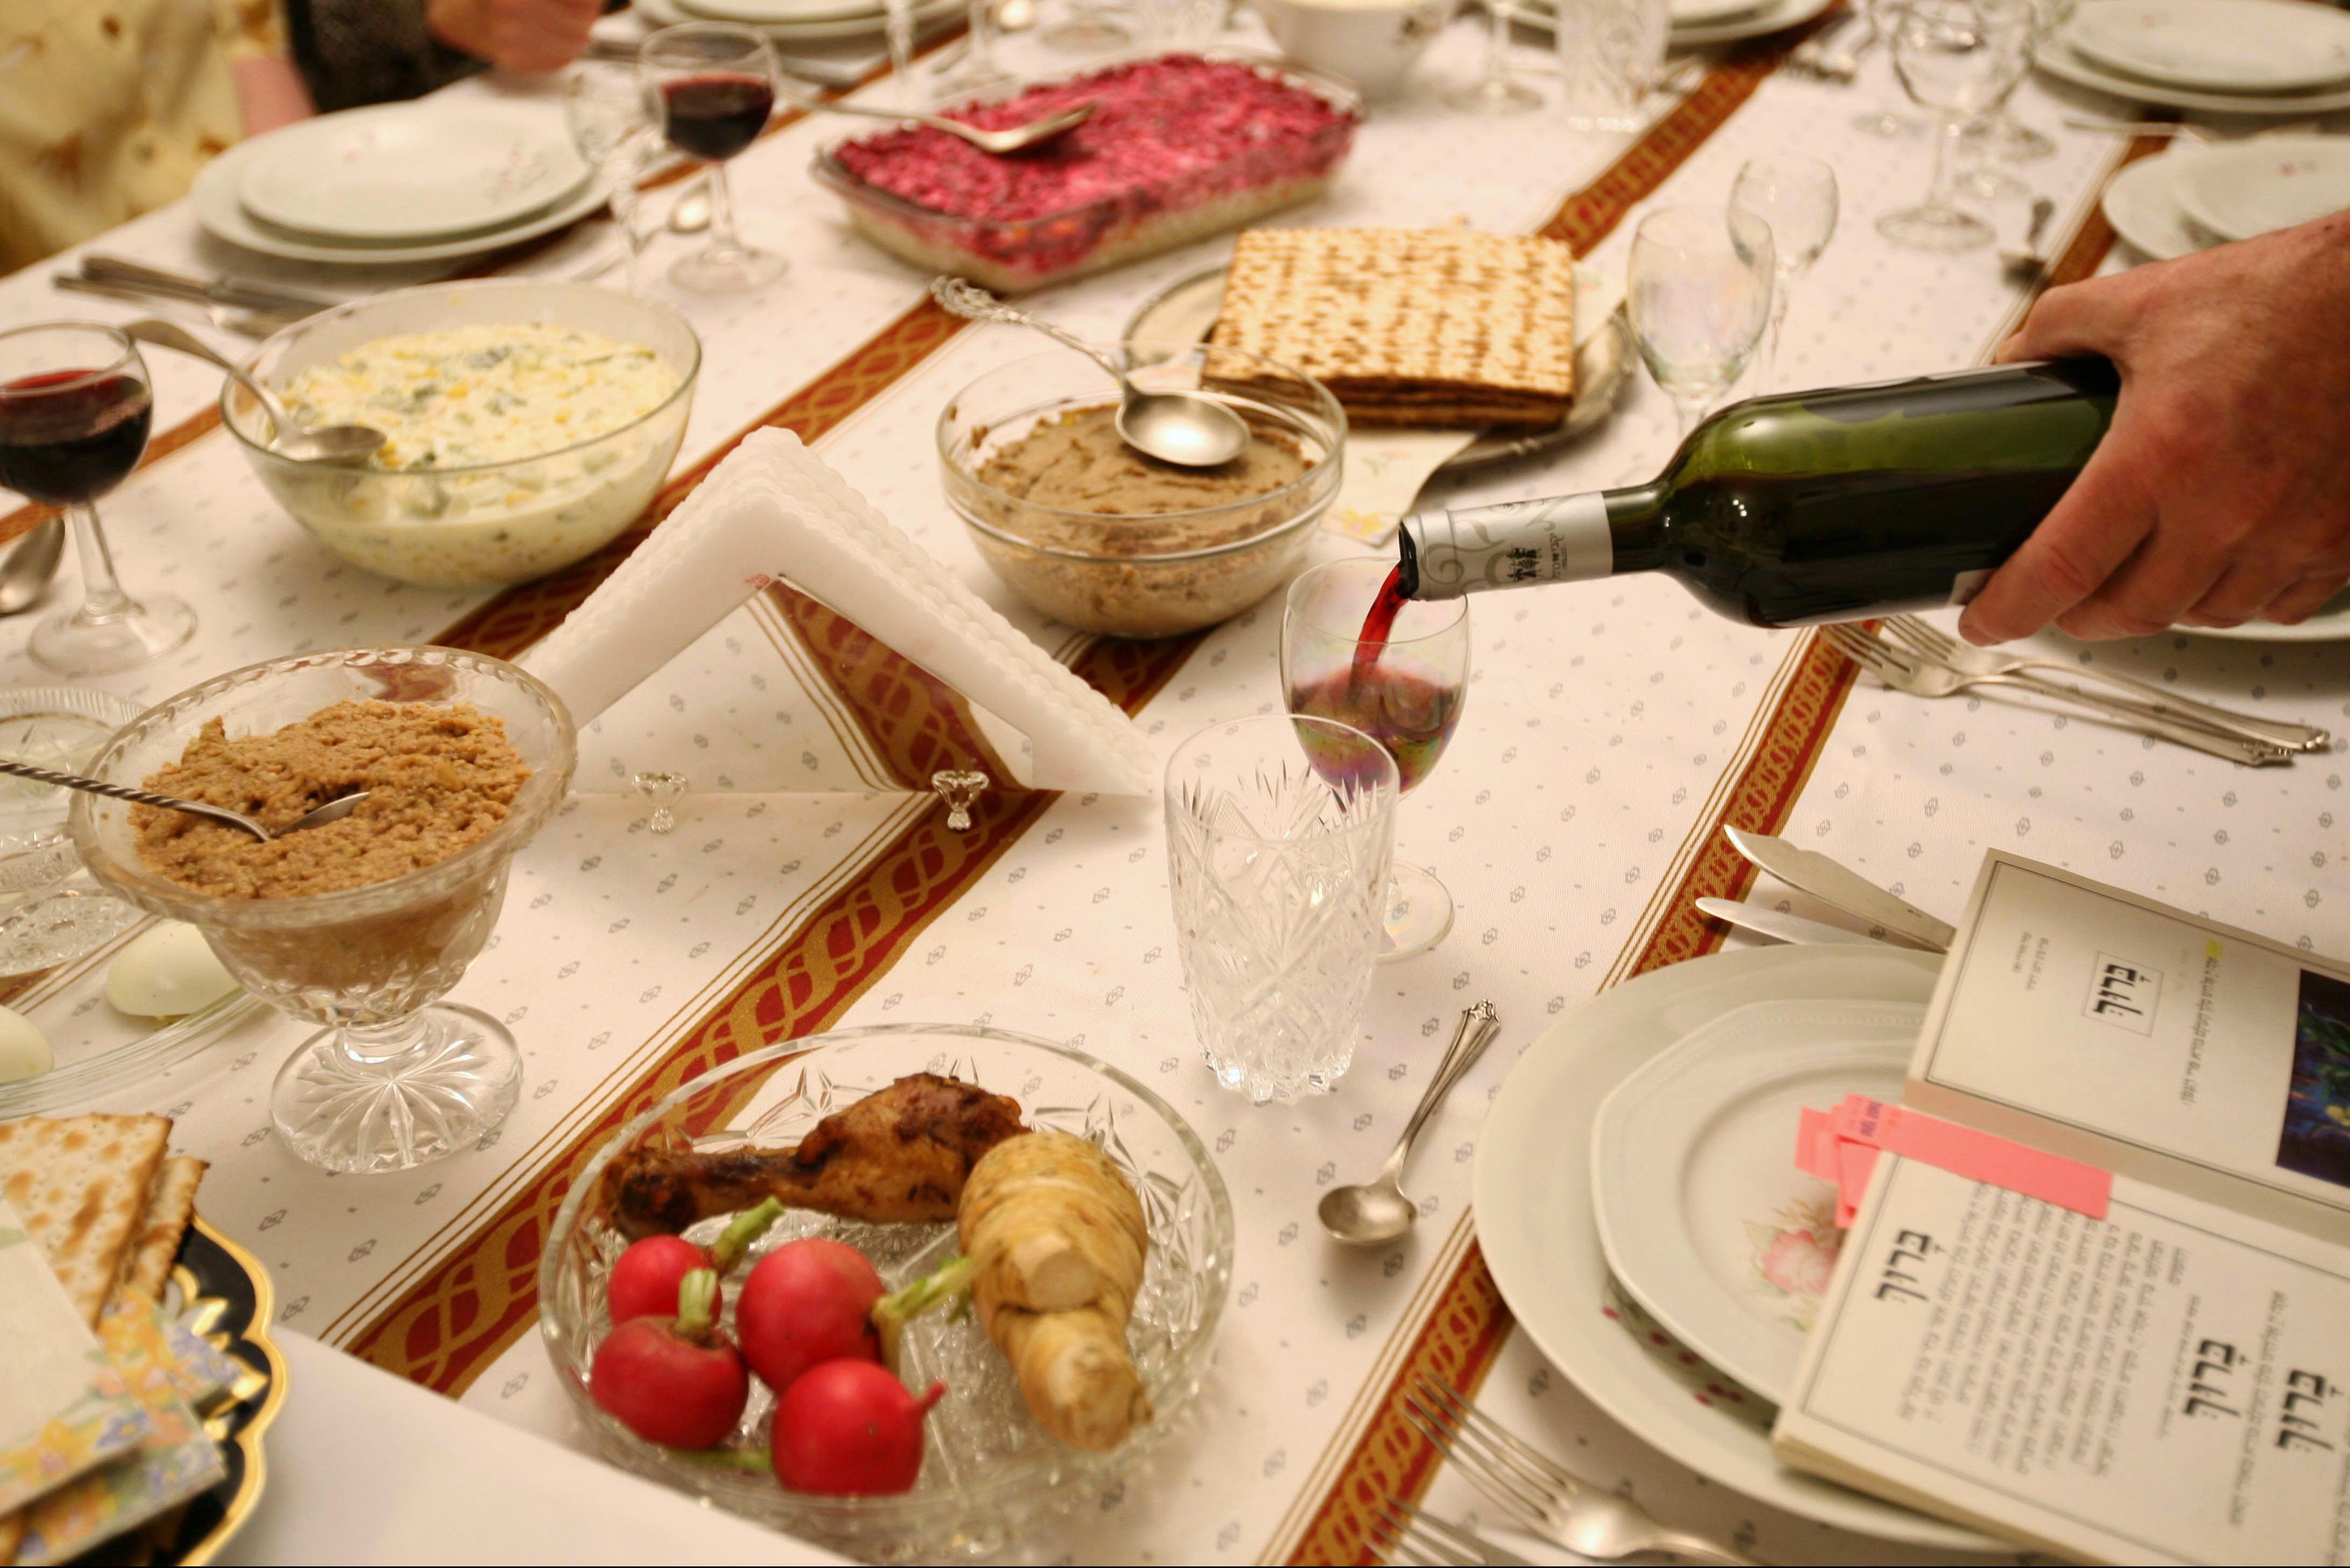 Seder Night – Unparalleled Opportunity for Mitzvos